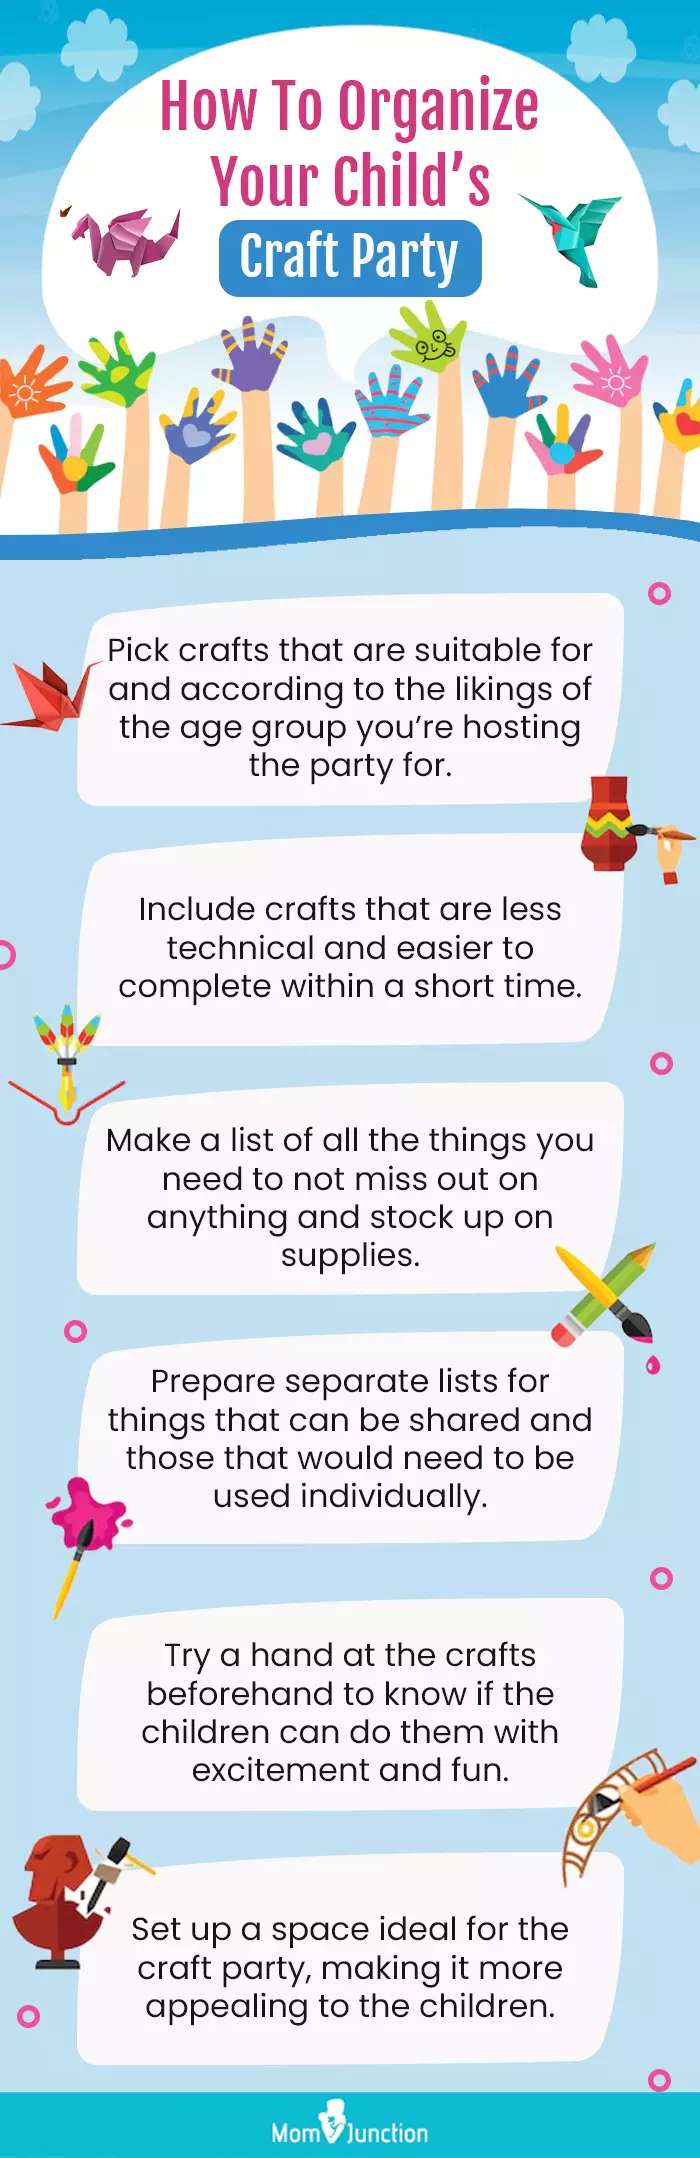 how to organize your child’s craft party (infographic)